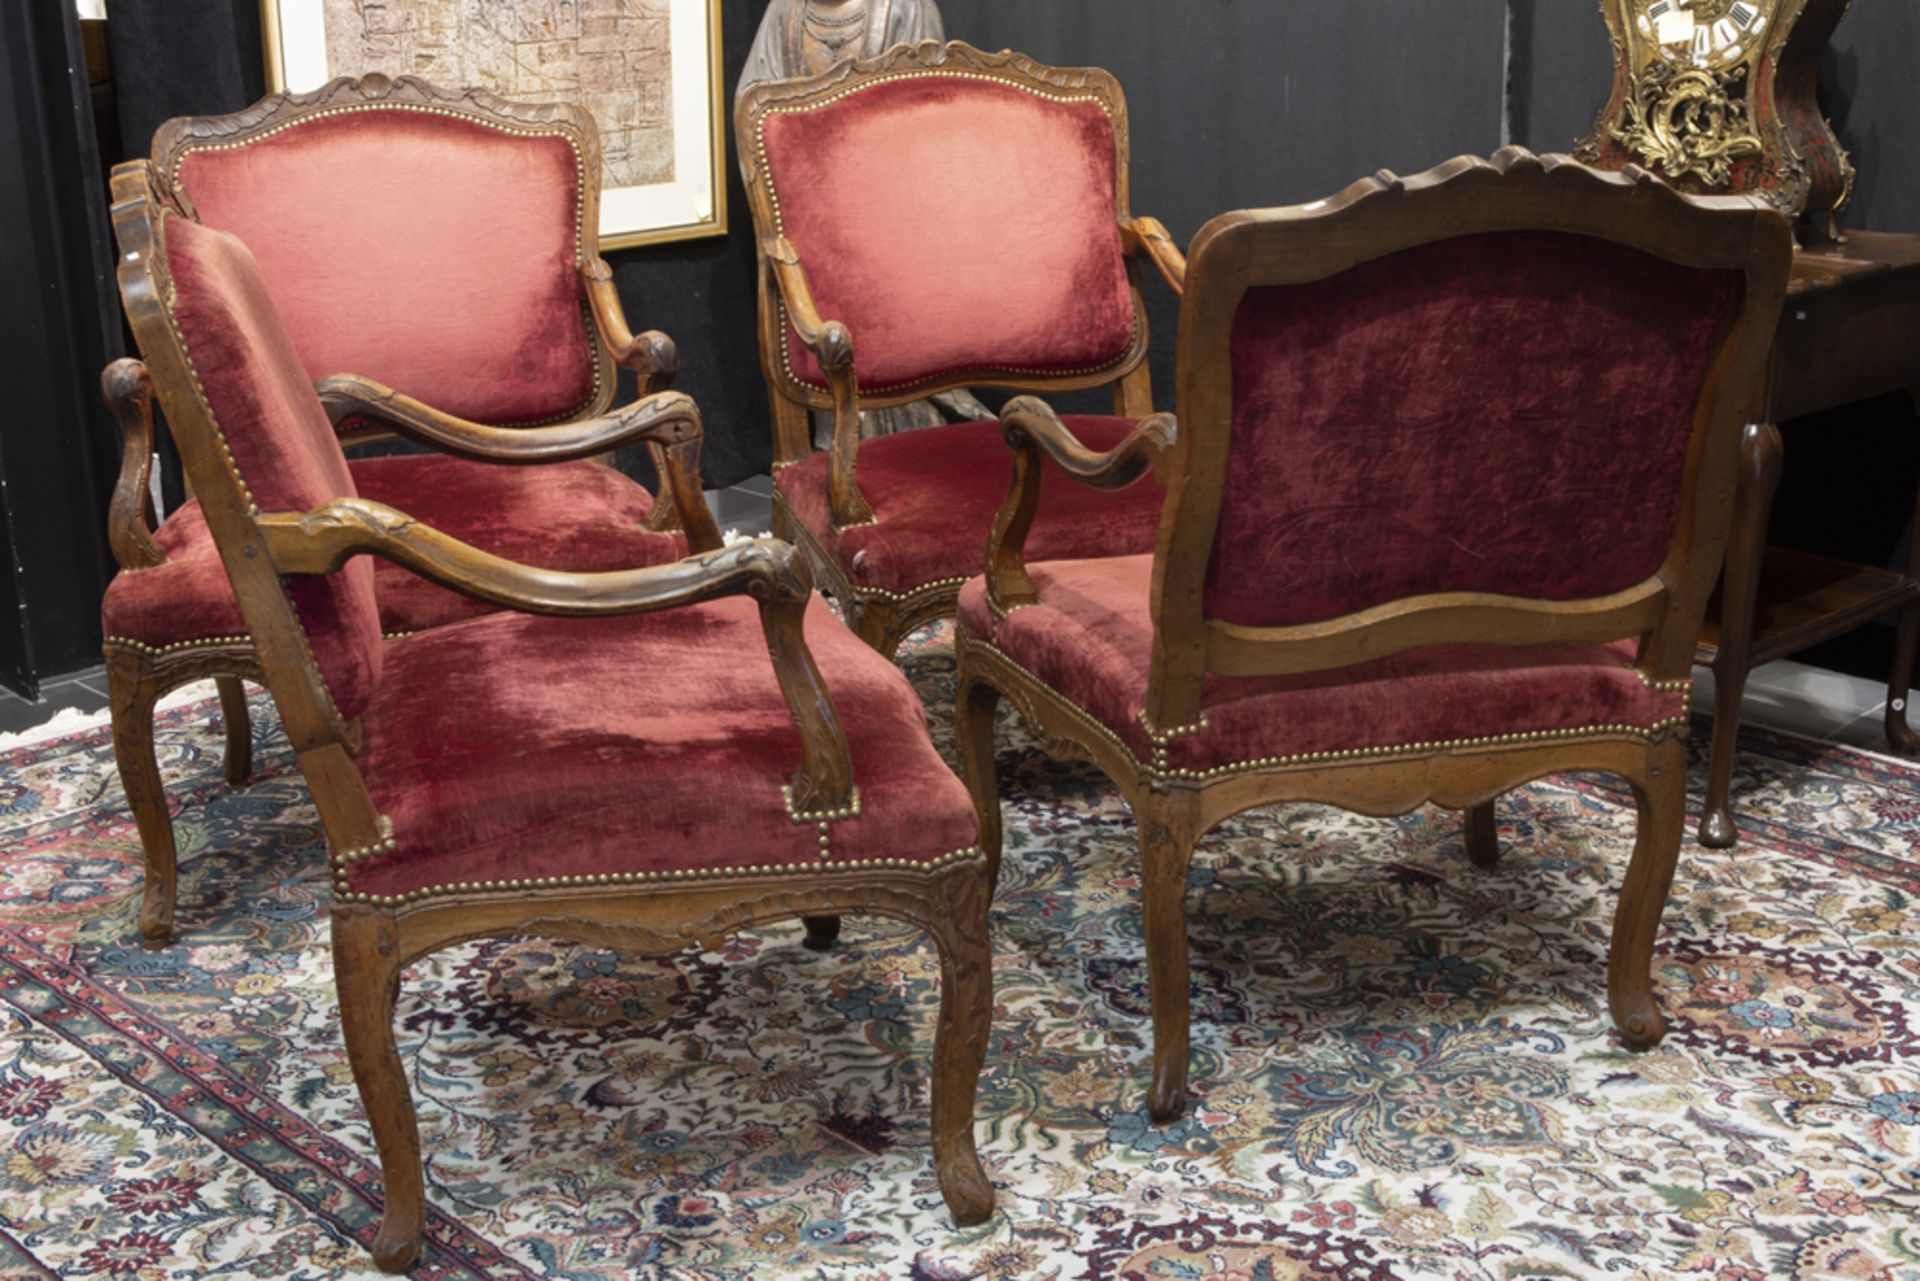 set of four 18th Cent. armchairs in walnut with finely carved Régence style ornamentation||Set van - Image 2 of 2